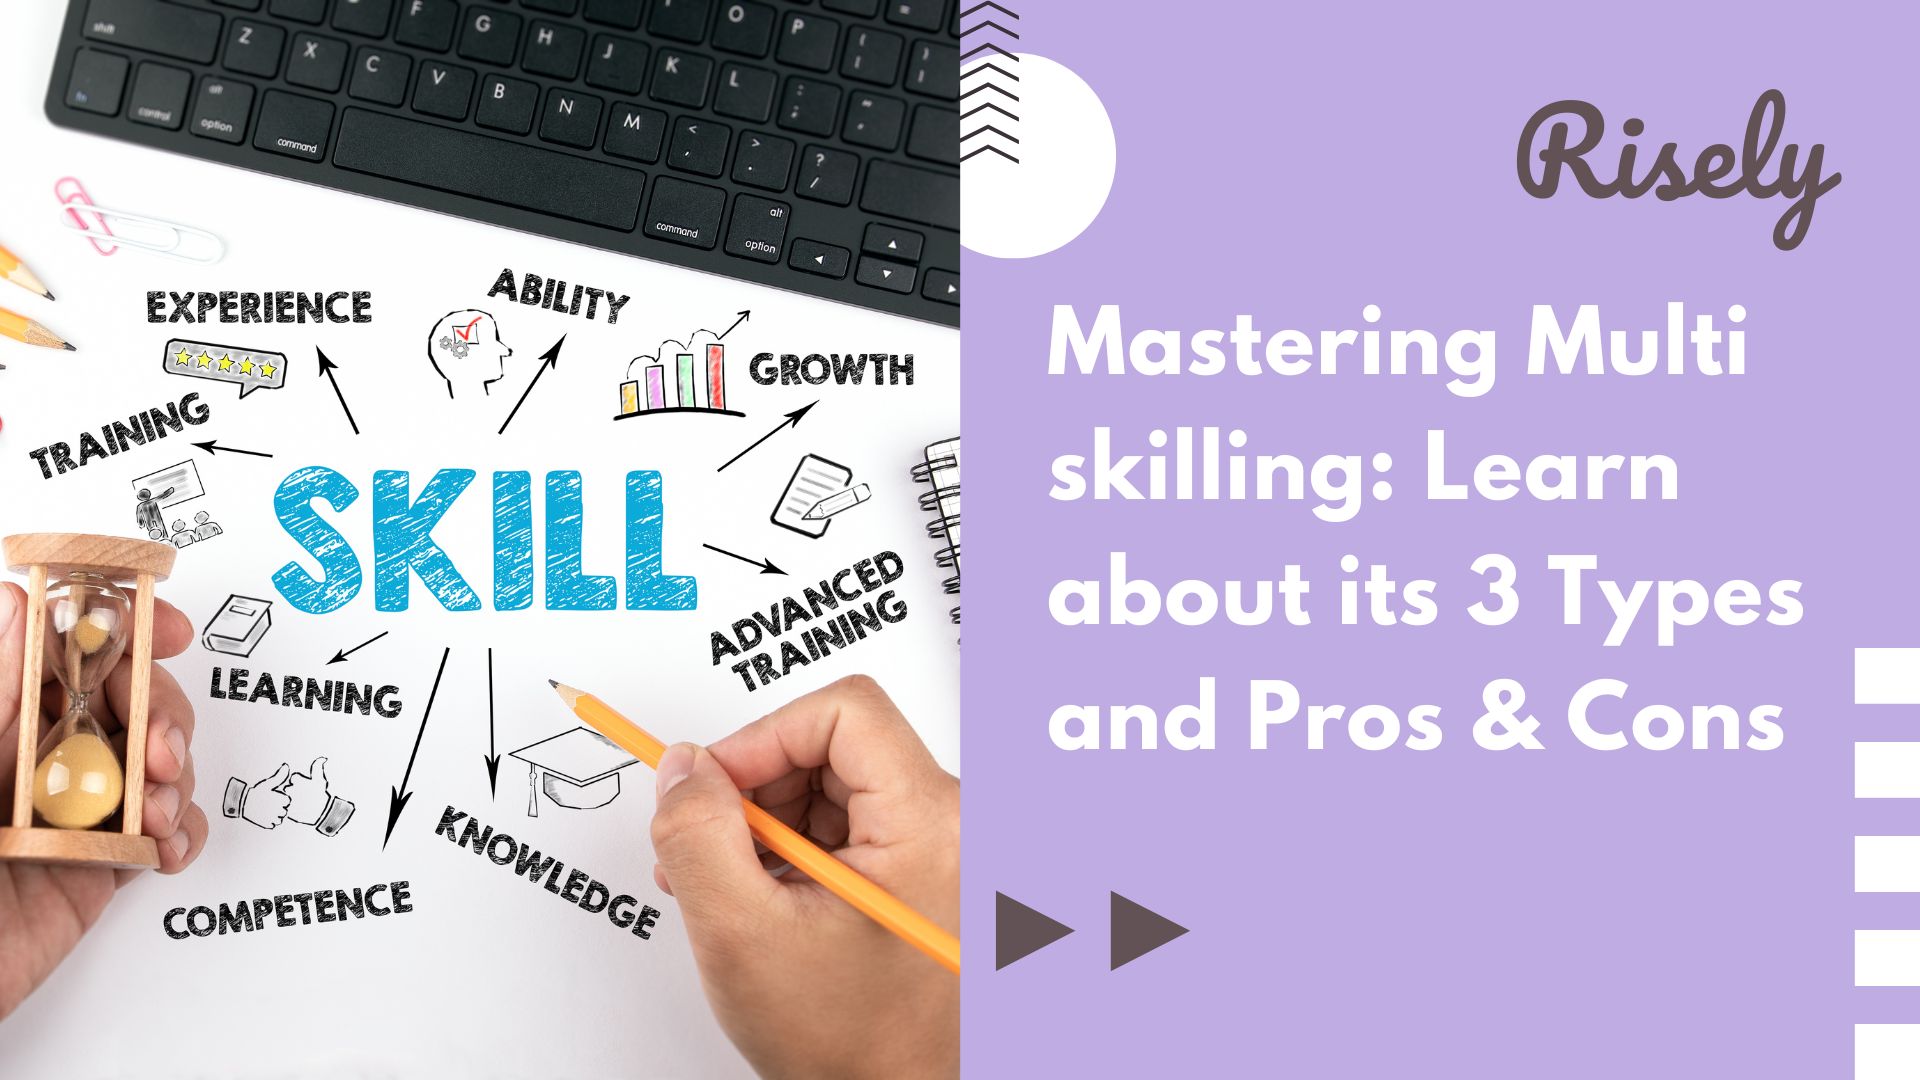 Mastering Multi skilling: Learn about its 3 Types and Pros & Cons